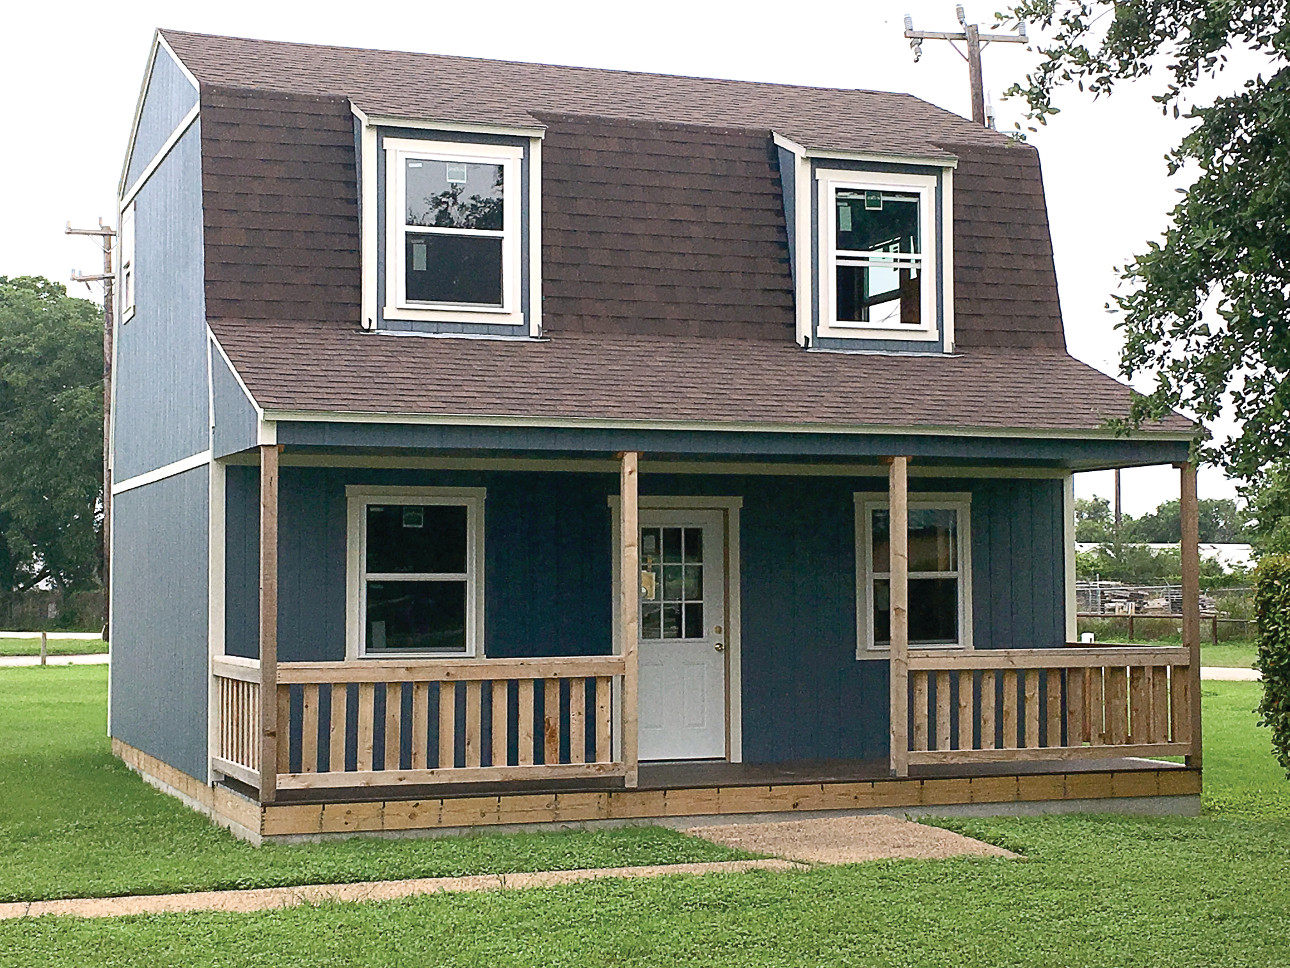 Man caves, 'she sheds,' cabins; Tuff Shed opens new retail ...